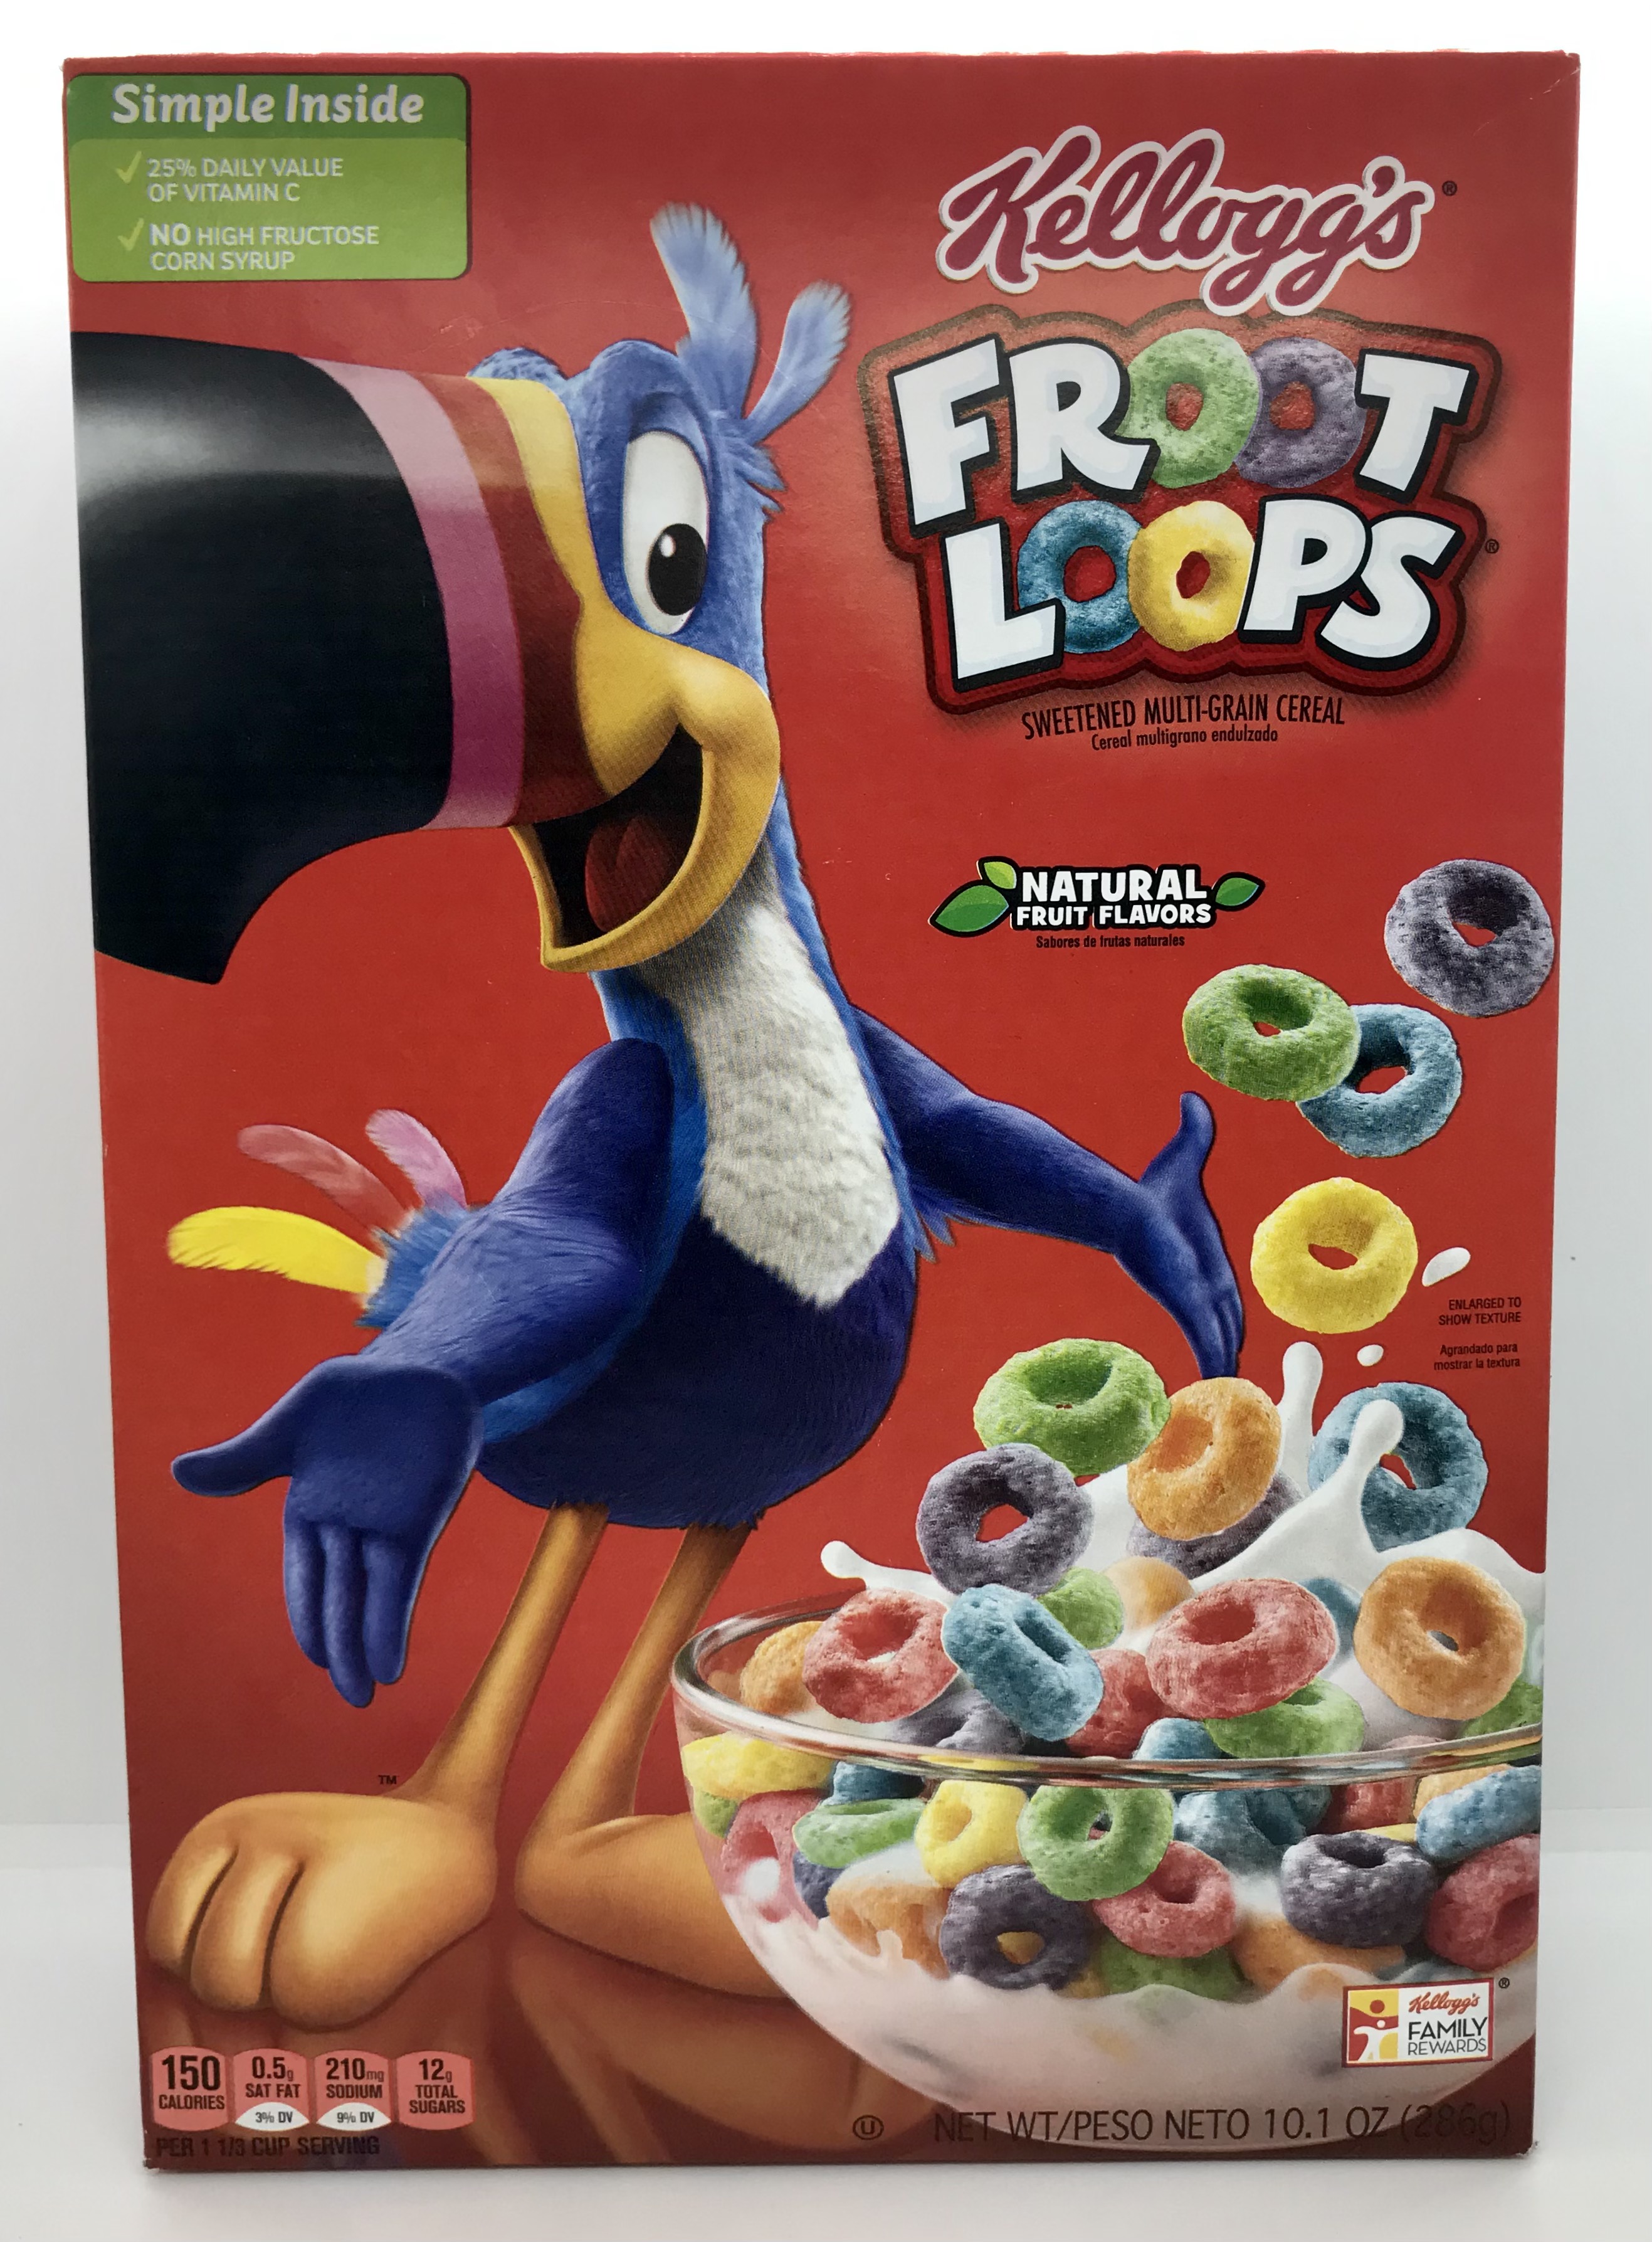 Kellogg's Froot Loops 286g. - Gala Apple Grocery and Produce